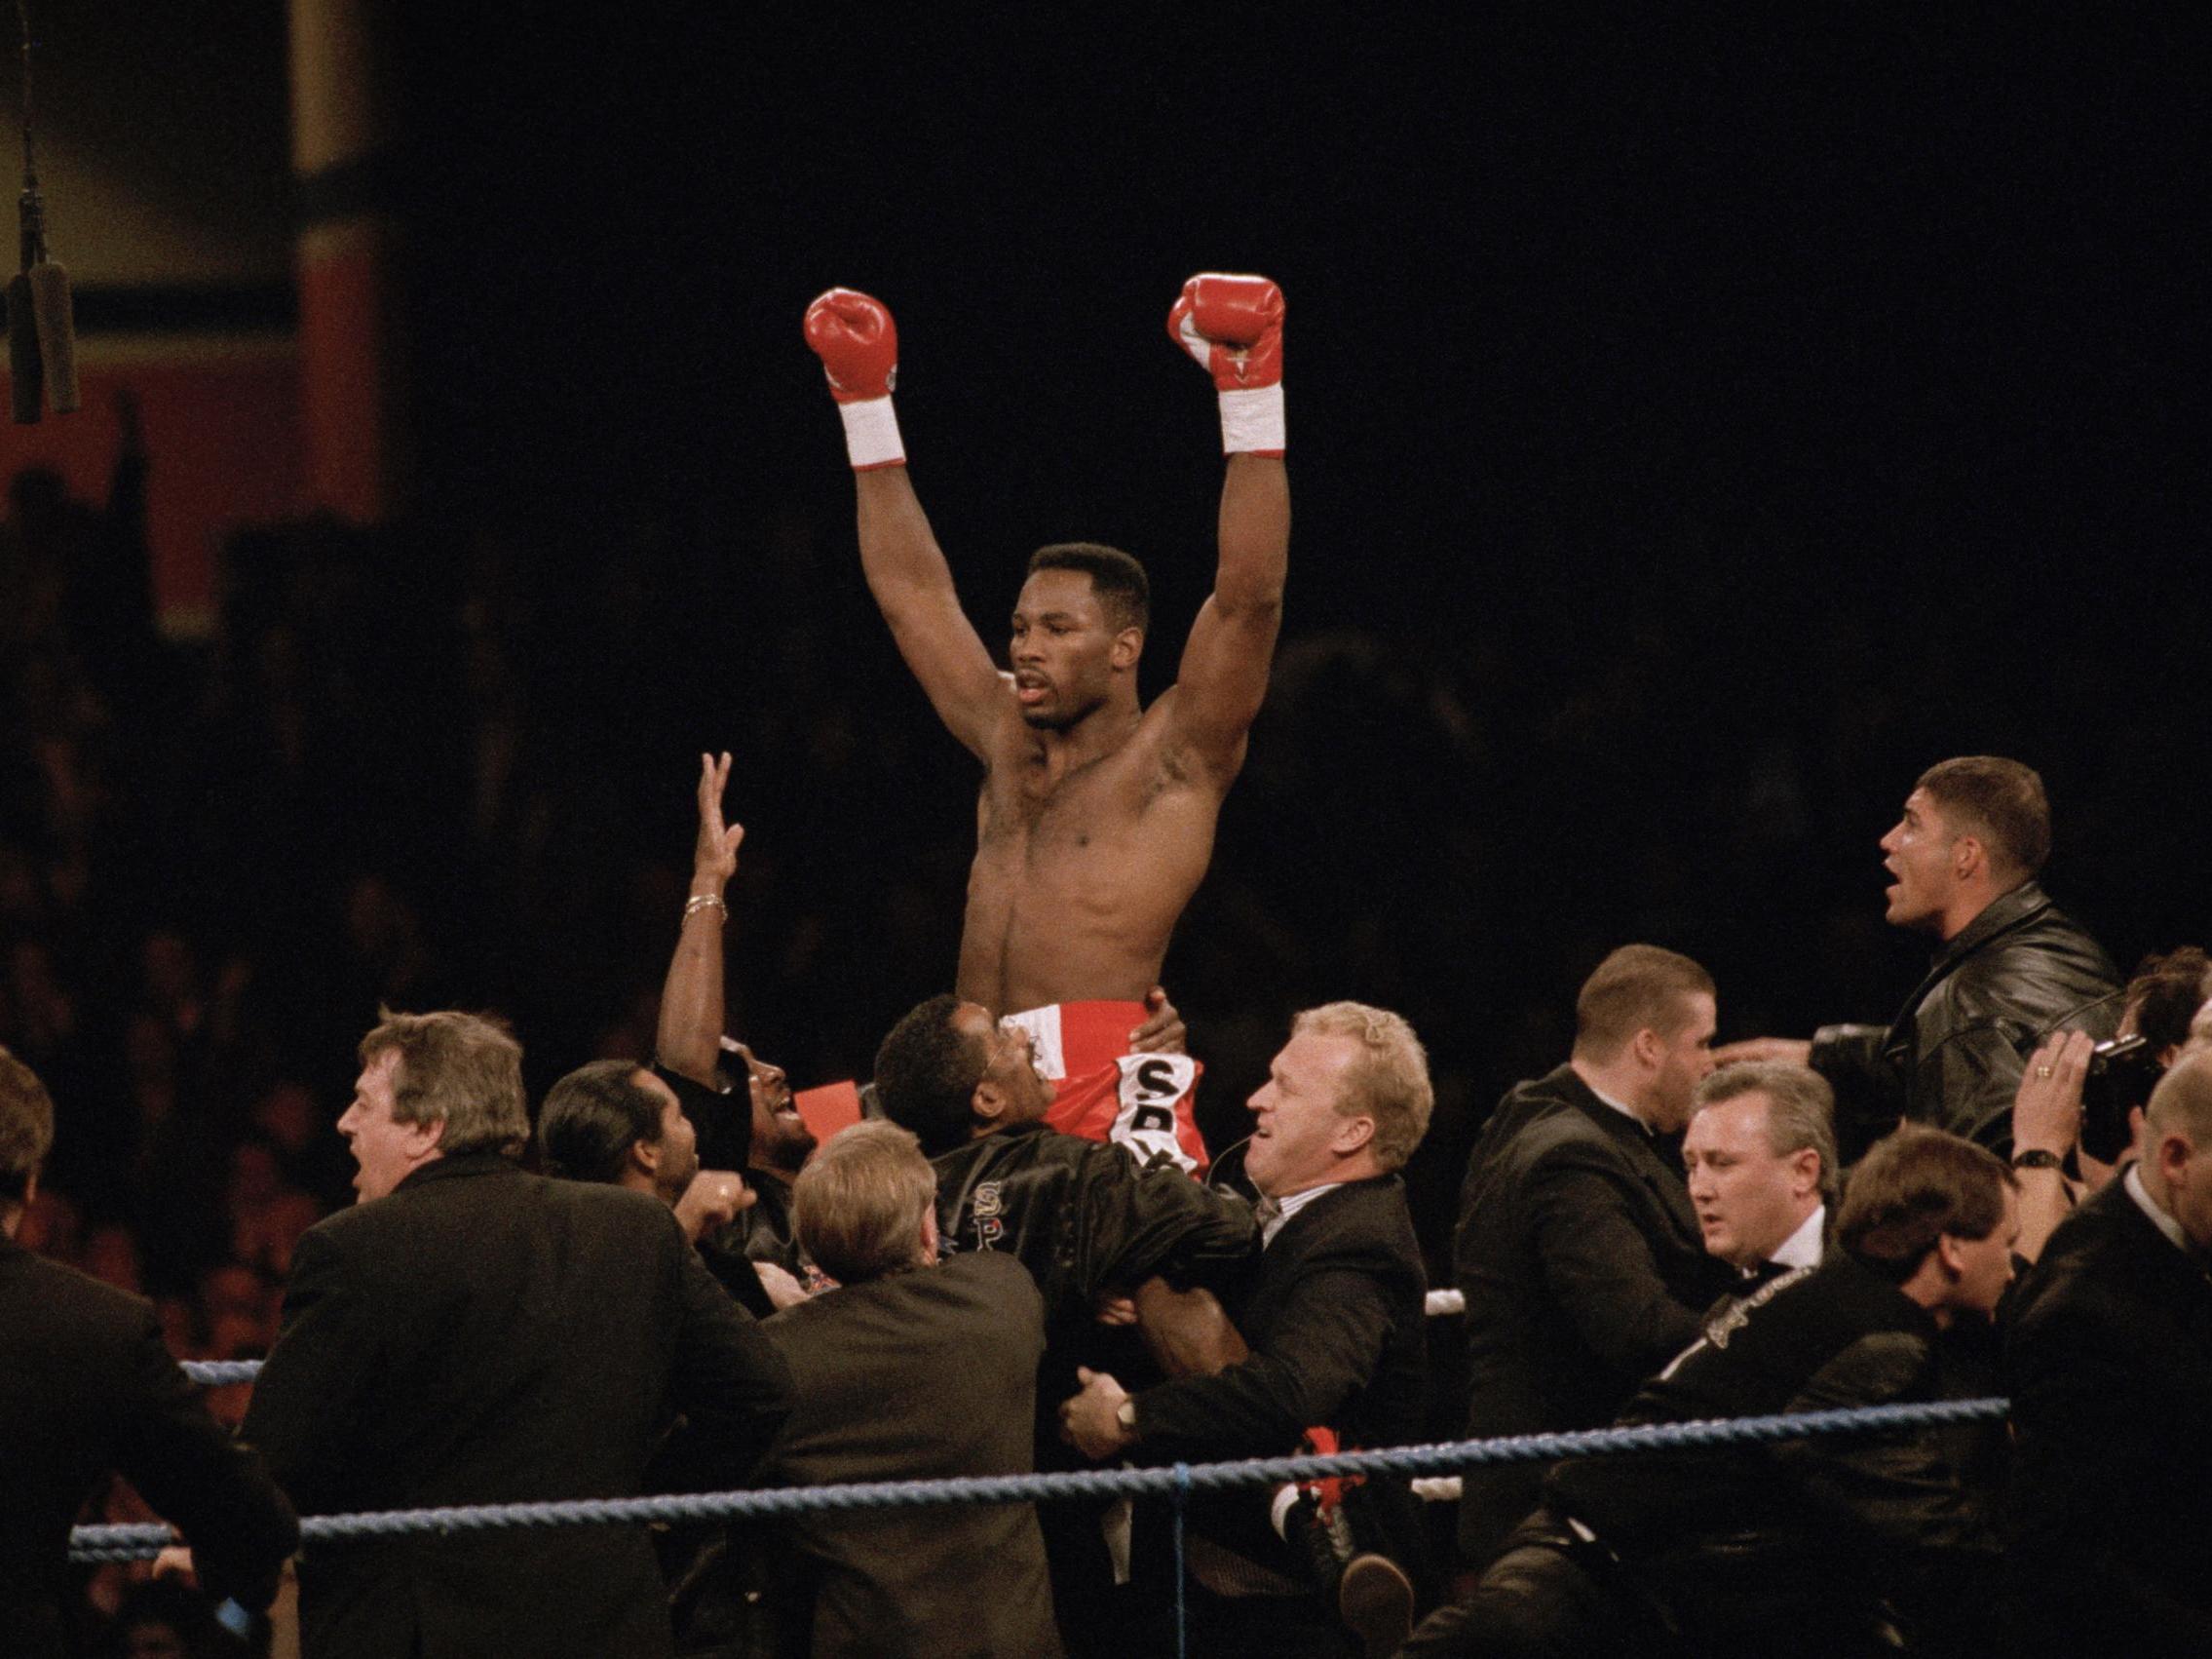 Lennox Lewis celebrates his WBC victory after a 2nd round knockout of Donovan Razor Ruddock on 31 October 1992